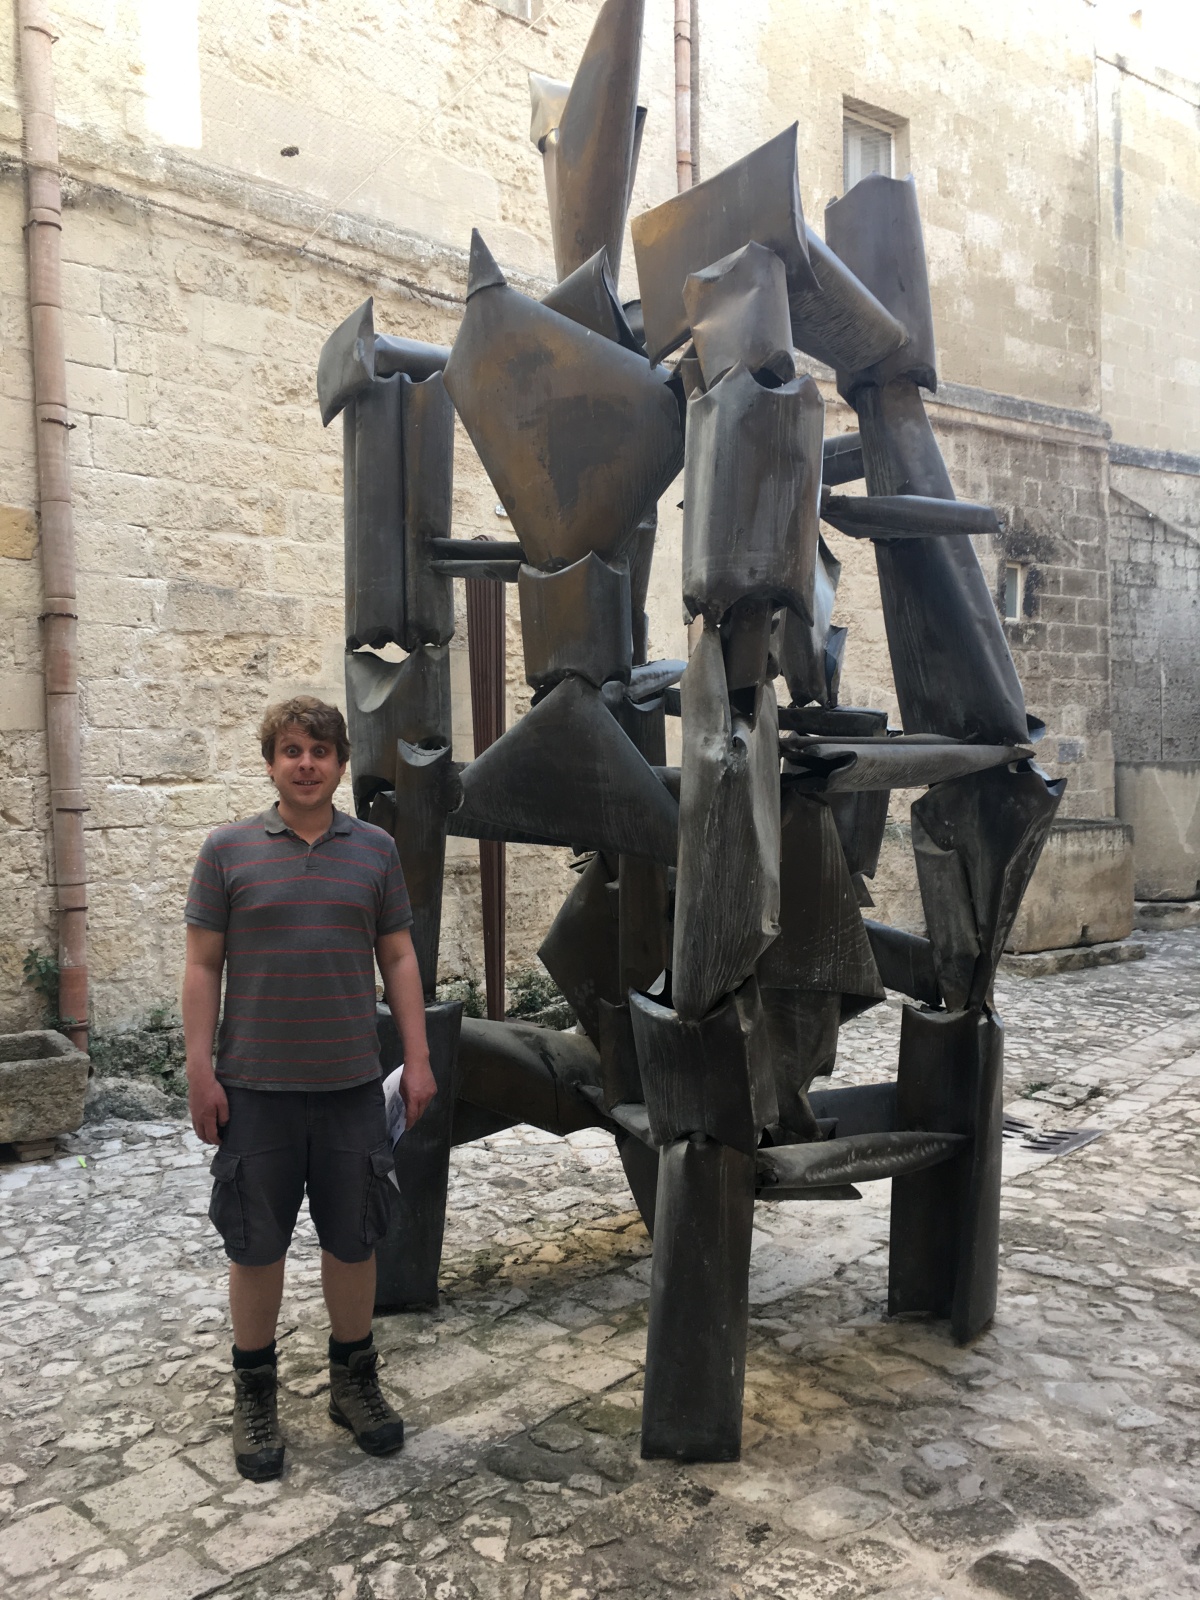 MUSMA, Matera's museum of modern sculpture set in a centuries-old cave. We visited on our babymoon.